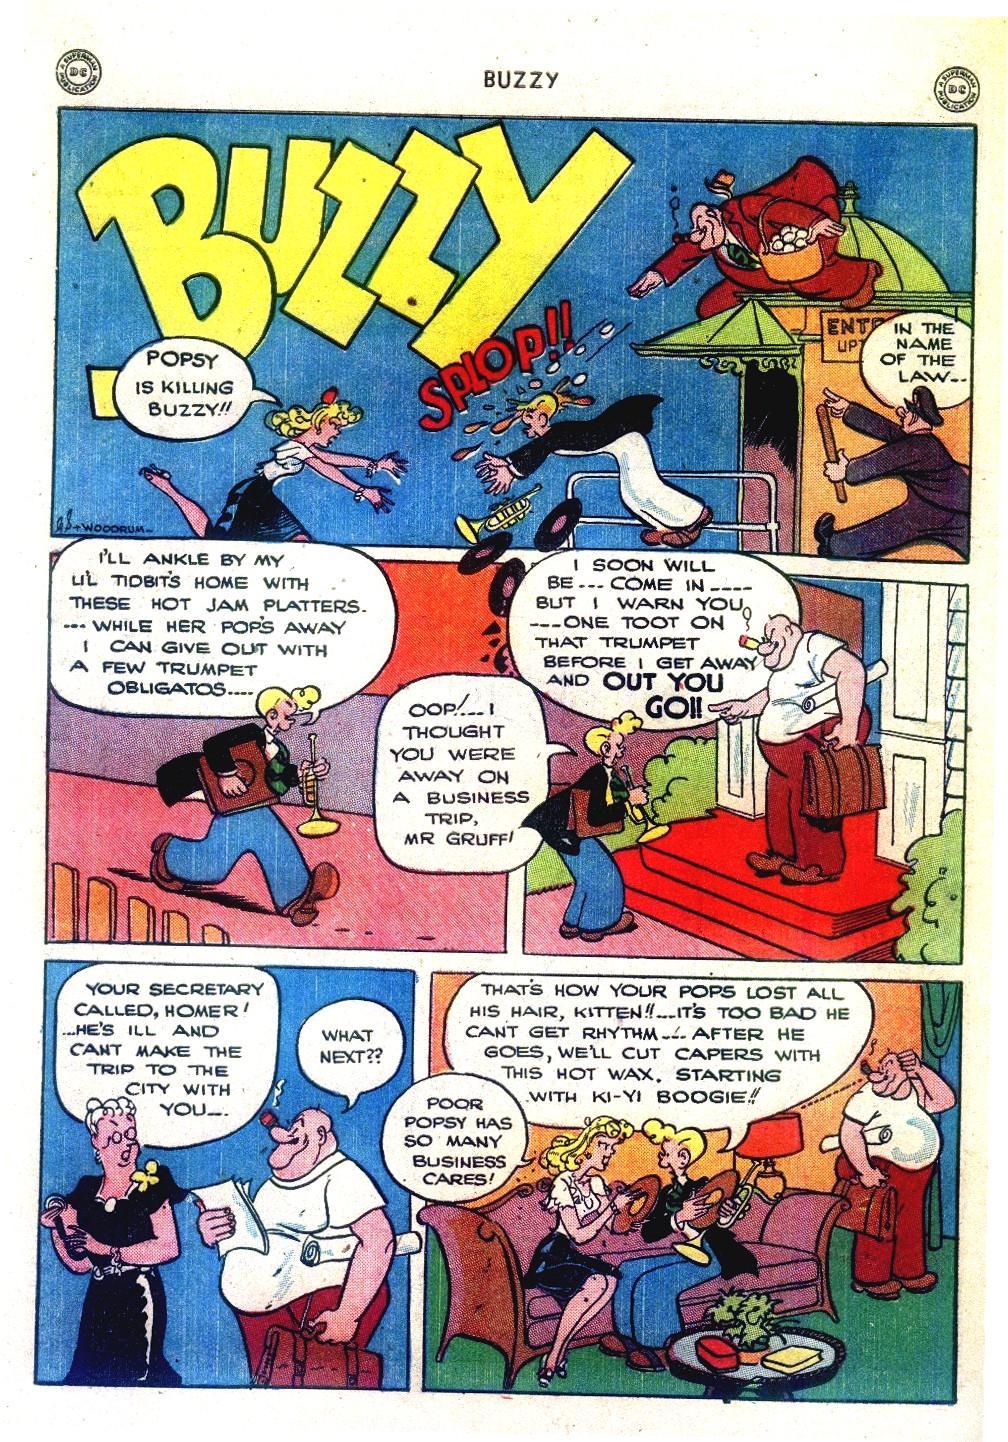 Read online Buzzy comic -  Issue #8 - 44